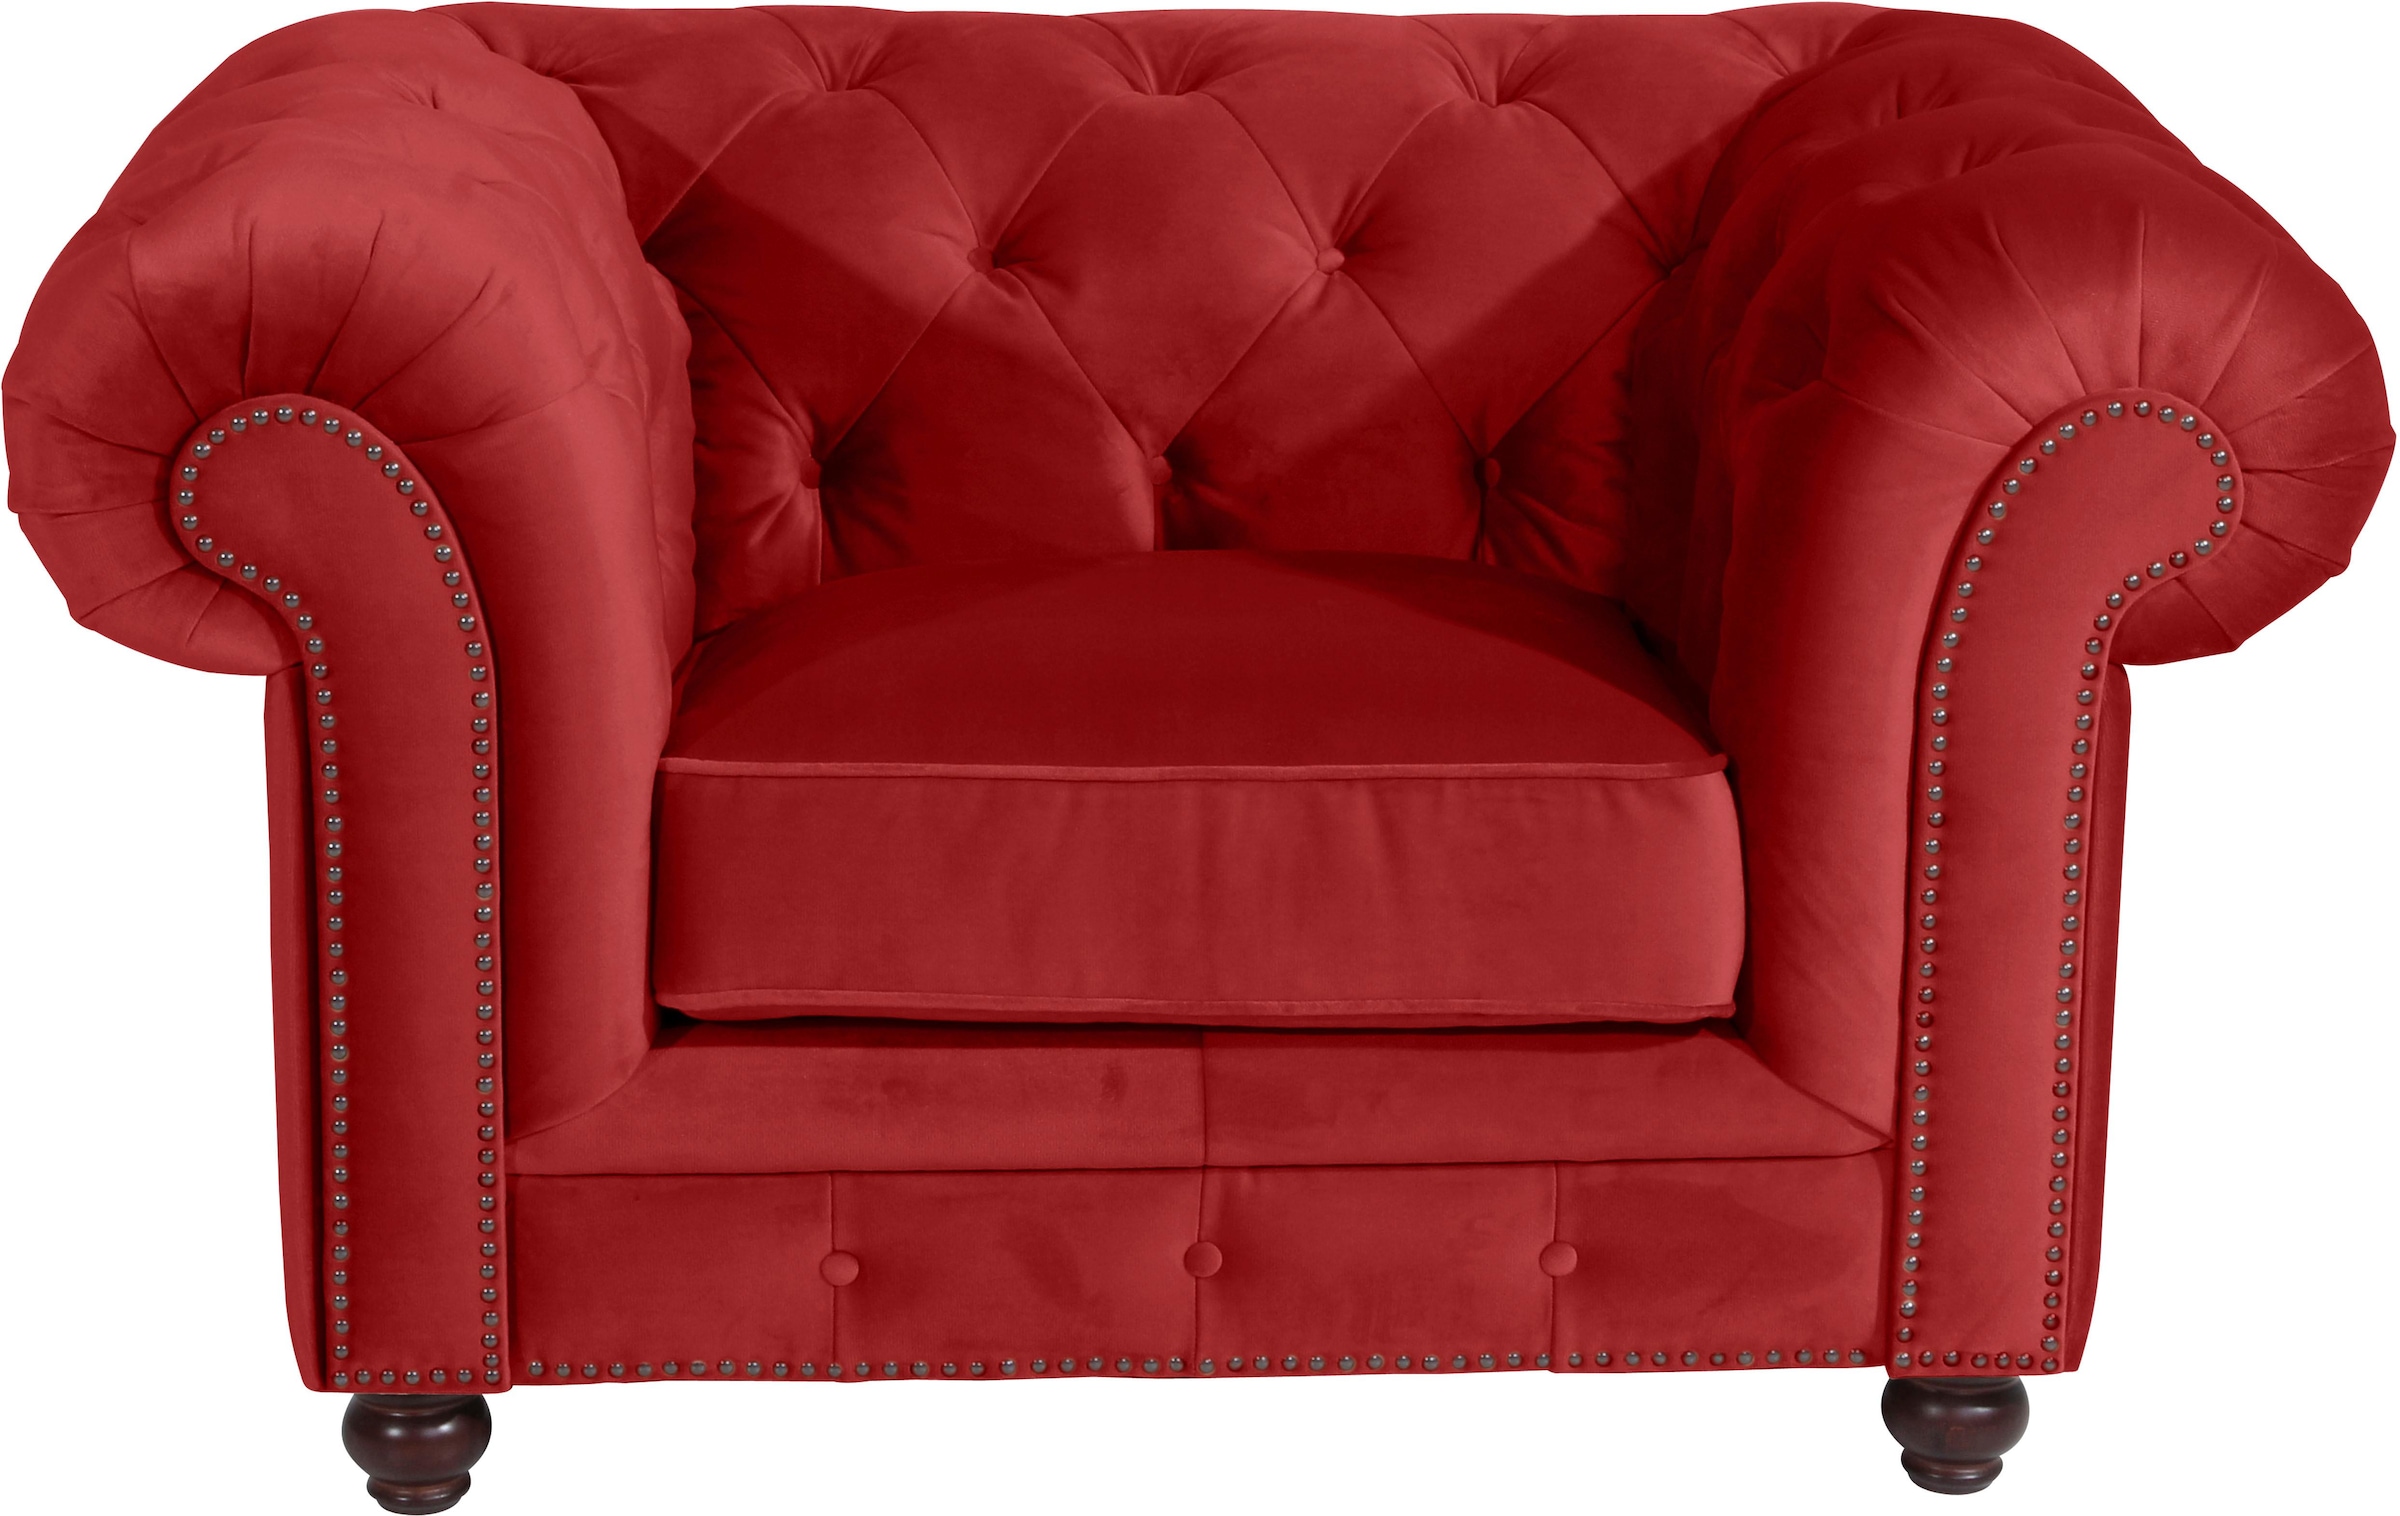 Chesterfield-Sessel »Old England, Loungesessel«, mit edler Knopfheftung